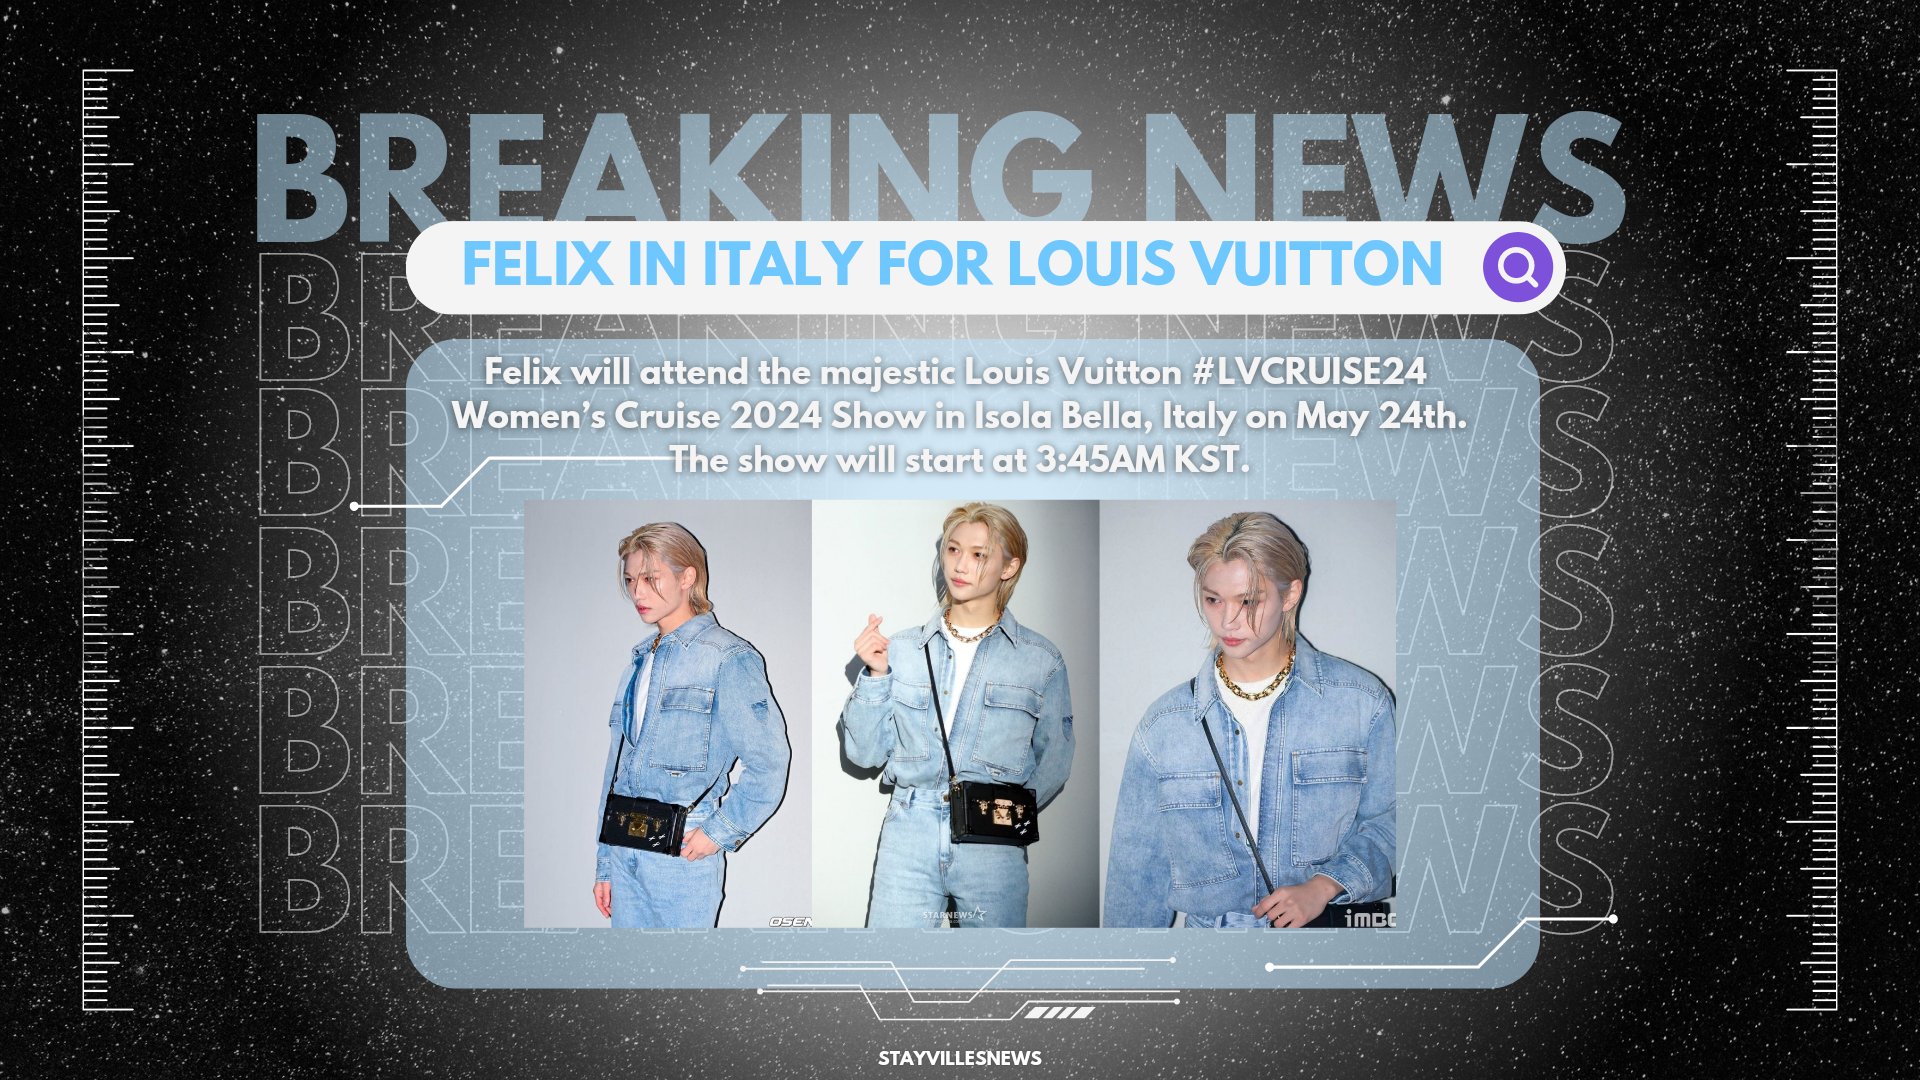 Watch Louis Vuitton Women's Cruise 2024 show, live from Isola Bella in Italy